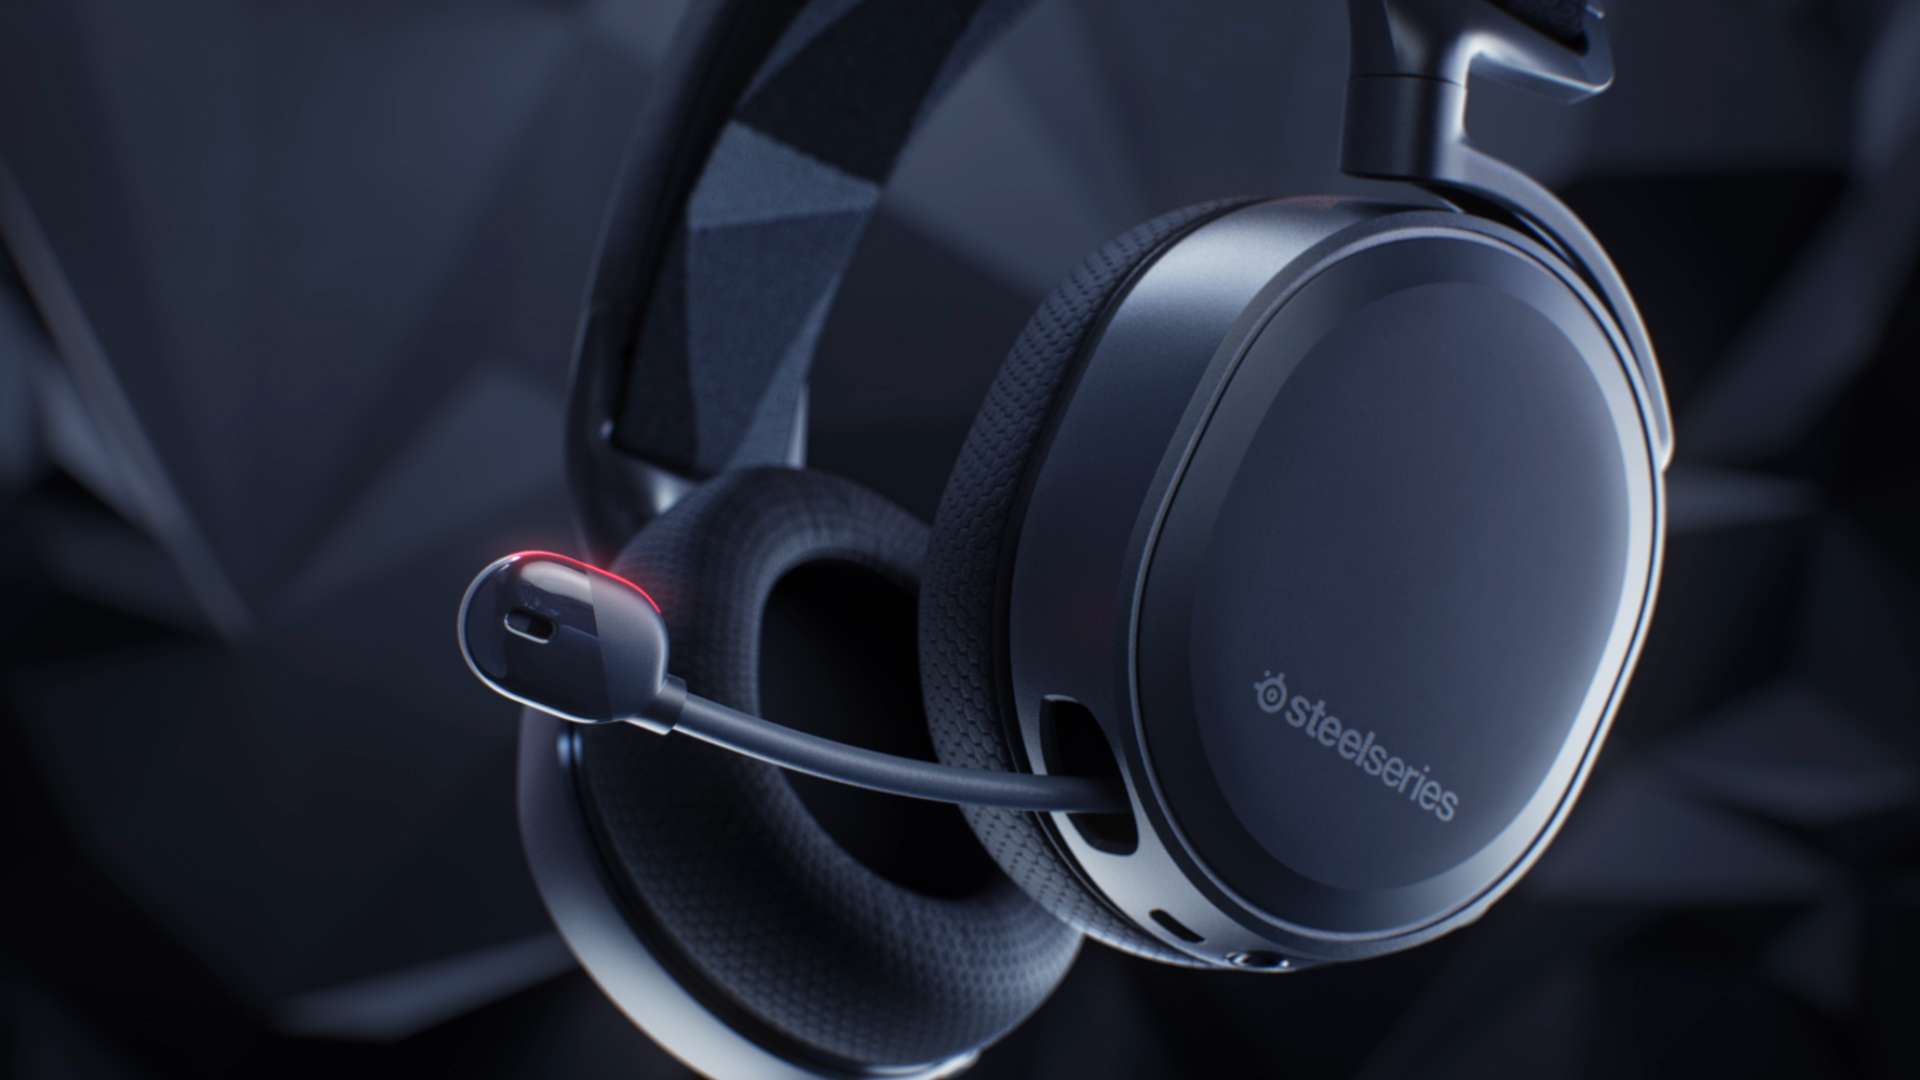 Why the Best Gaming Headset is Great for Everything